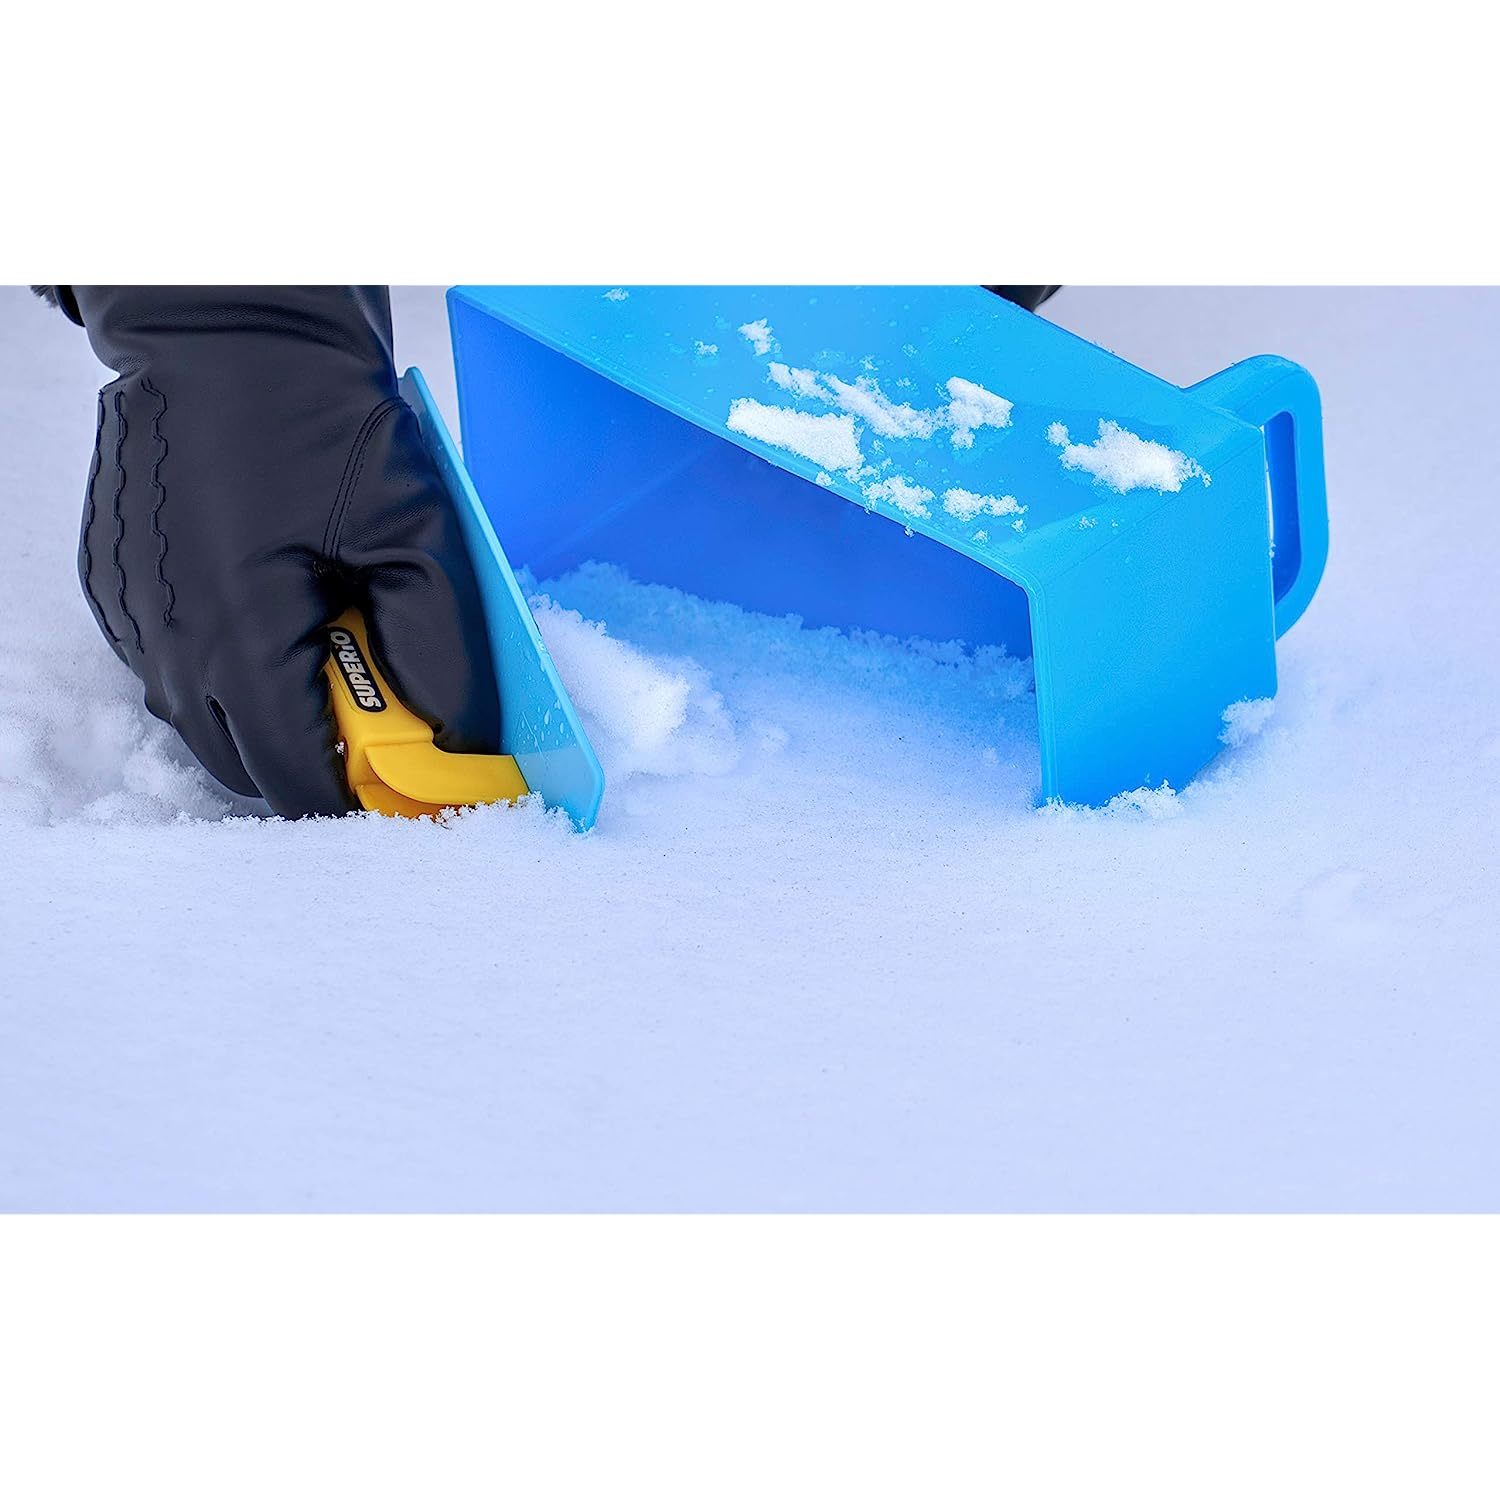 Superio Sandcastle Building Kit Snow Brick Maker Snow Sand Beach Toys for  Kids and Adults Igloo Snow Block Form for Snow Forts or Sandbox Play Sand  Toys Summer Outdoor Fun Beach Essentials-6 